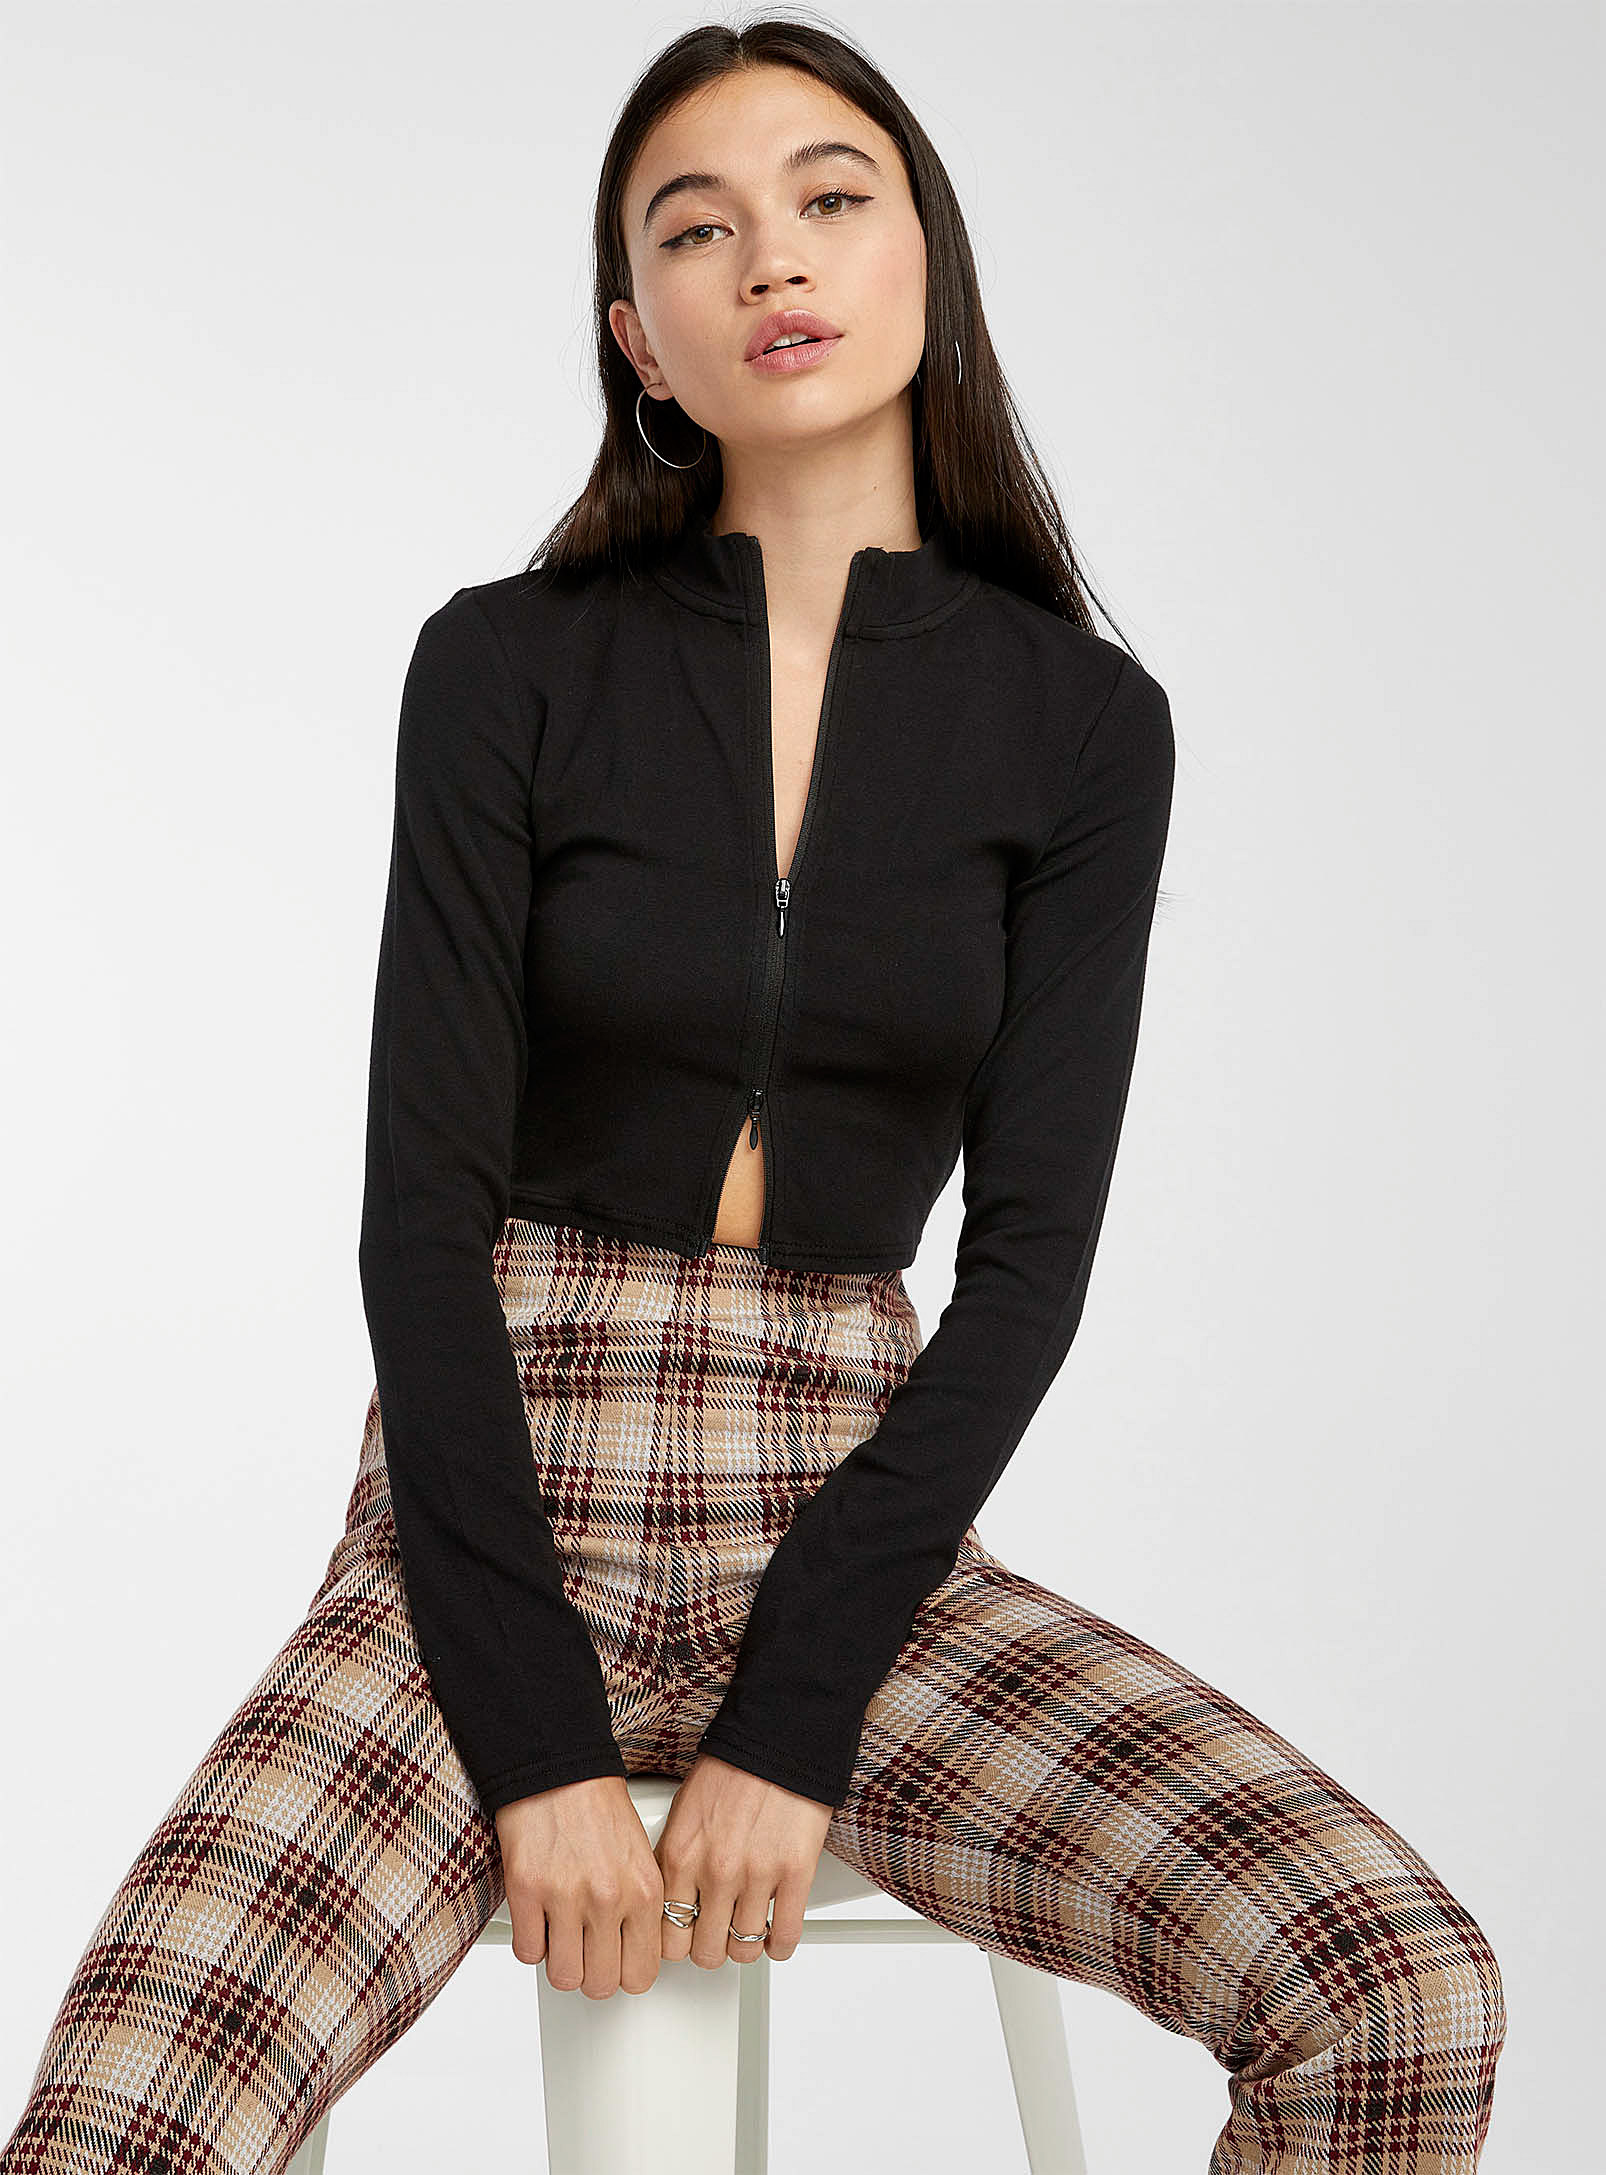 a person sitting on a stool wearing the sweater with checkered pants